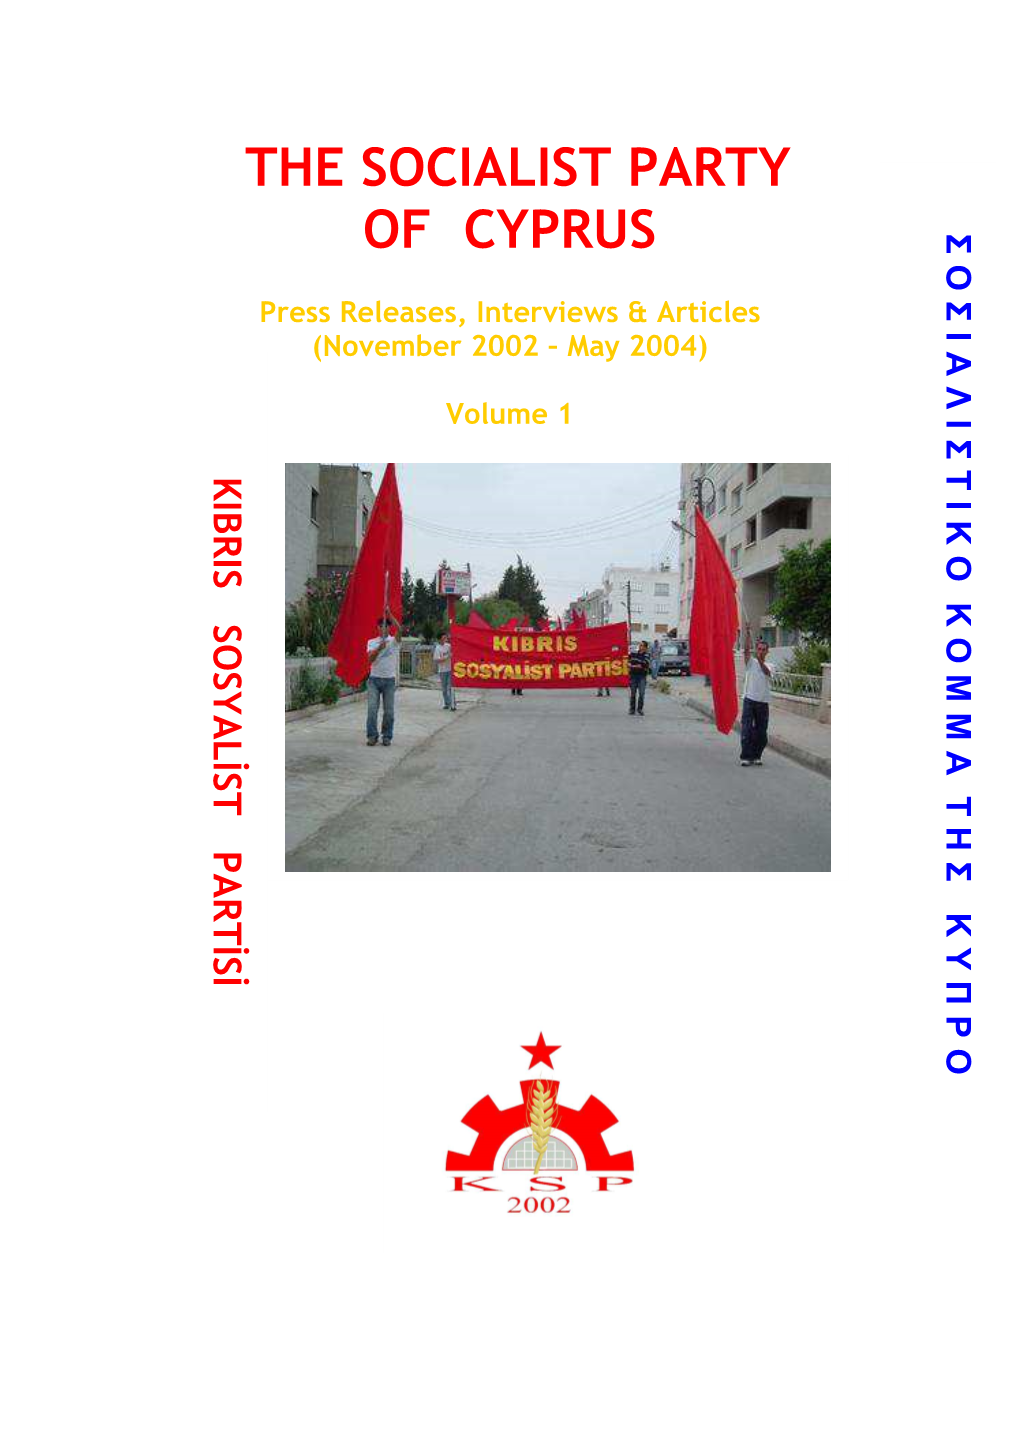 The Socialist Party of Cyprus –Press Releases, Interviews & Articles 2